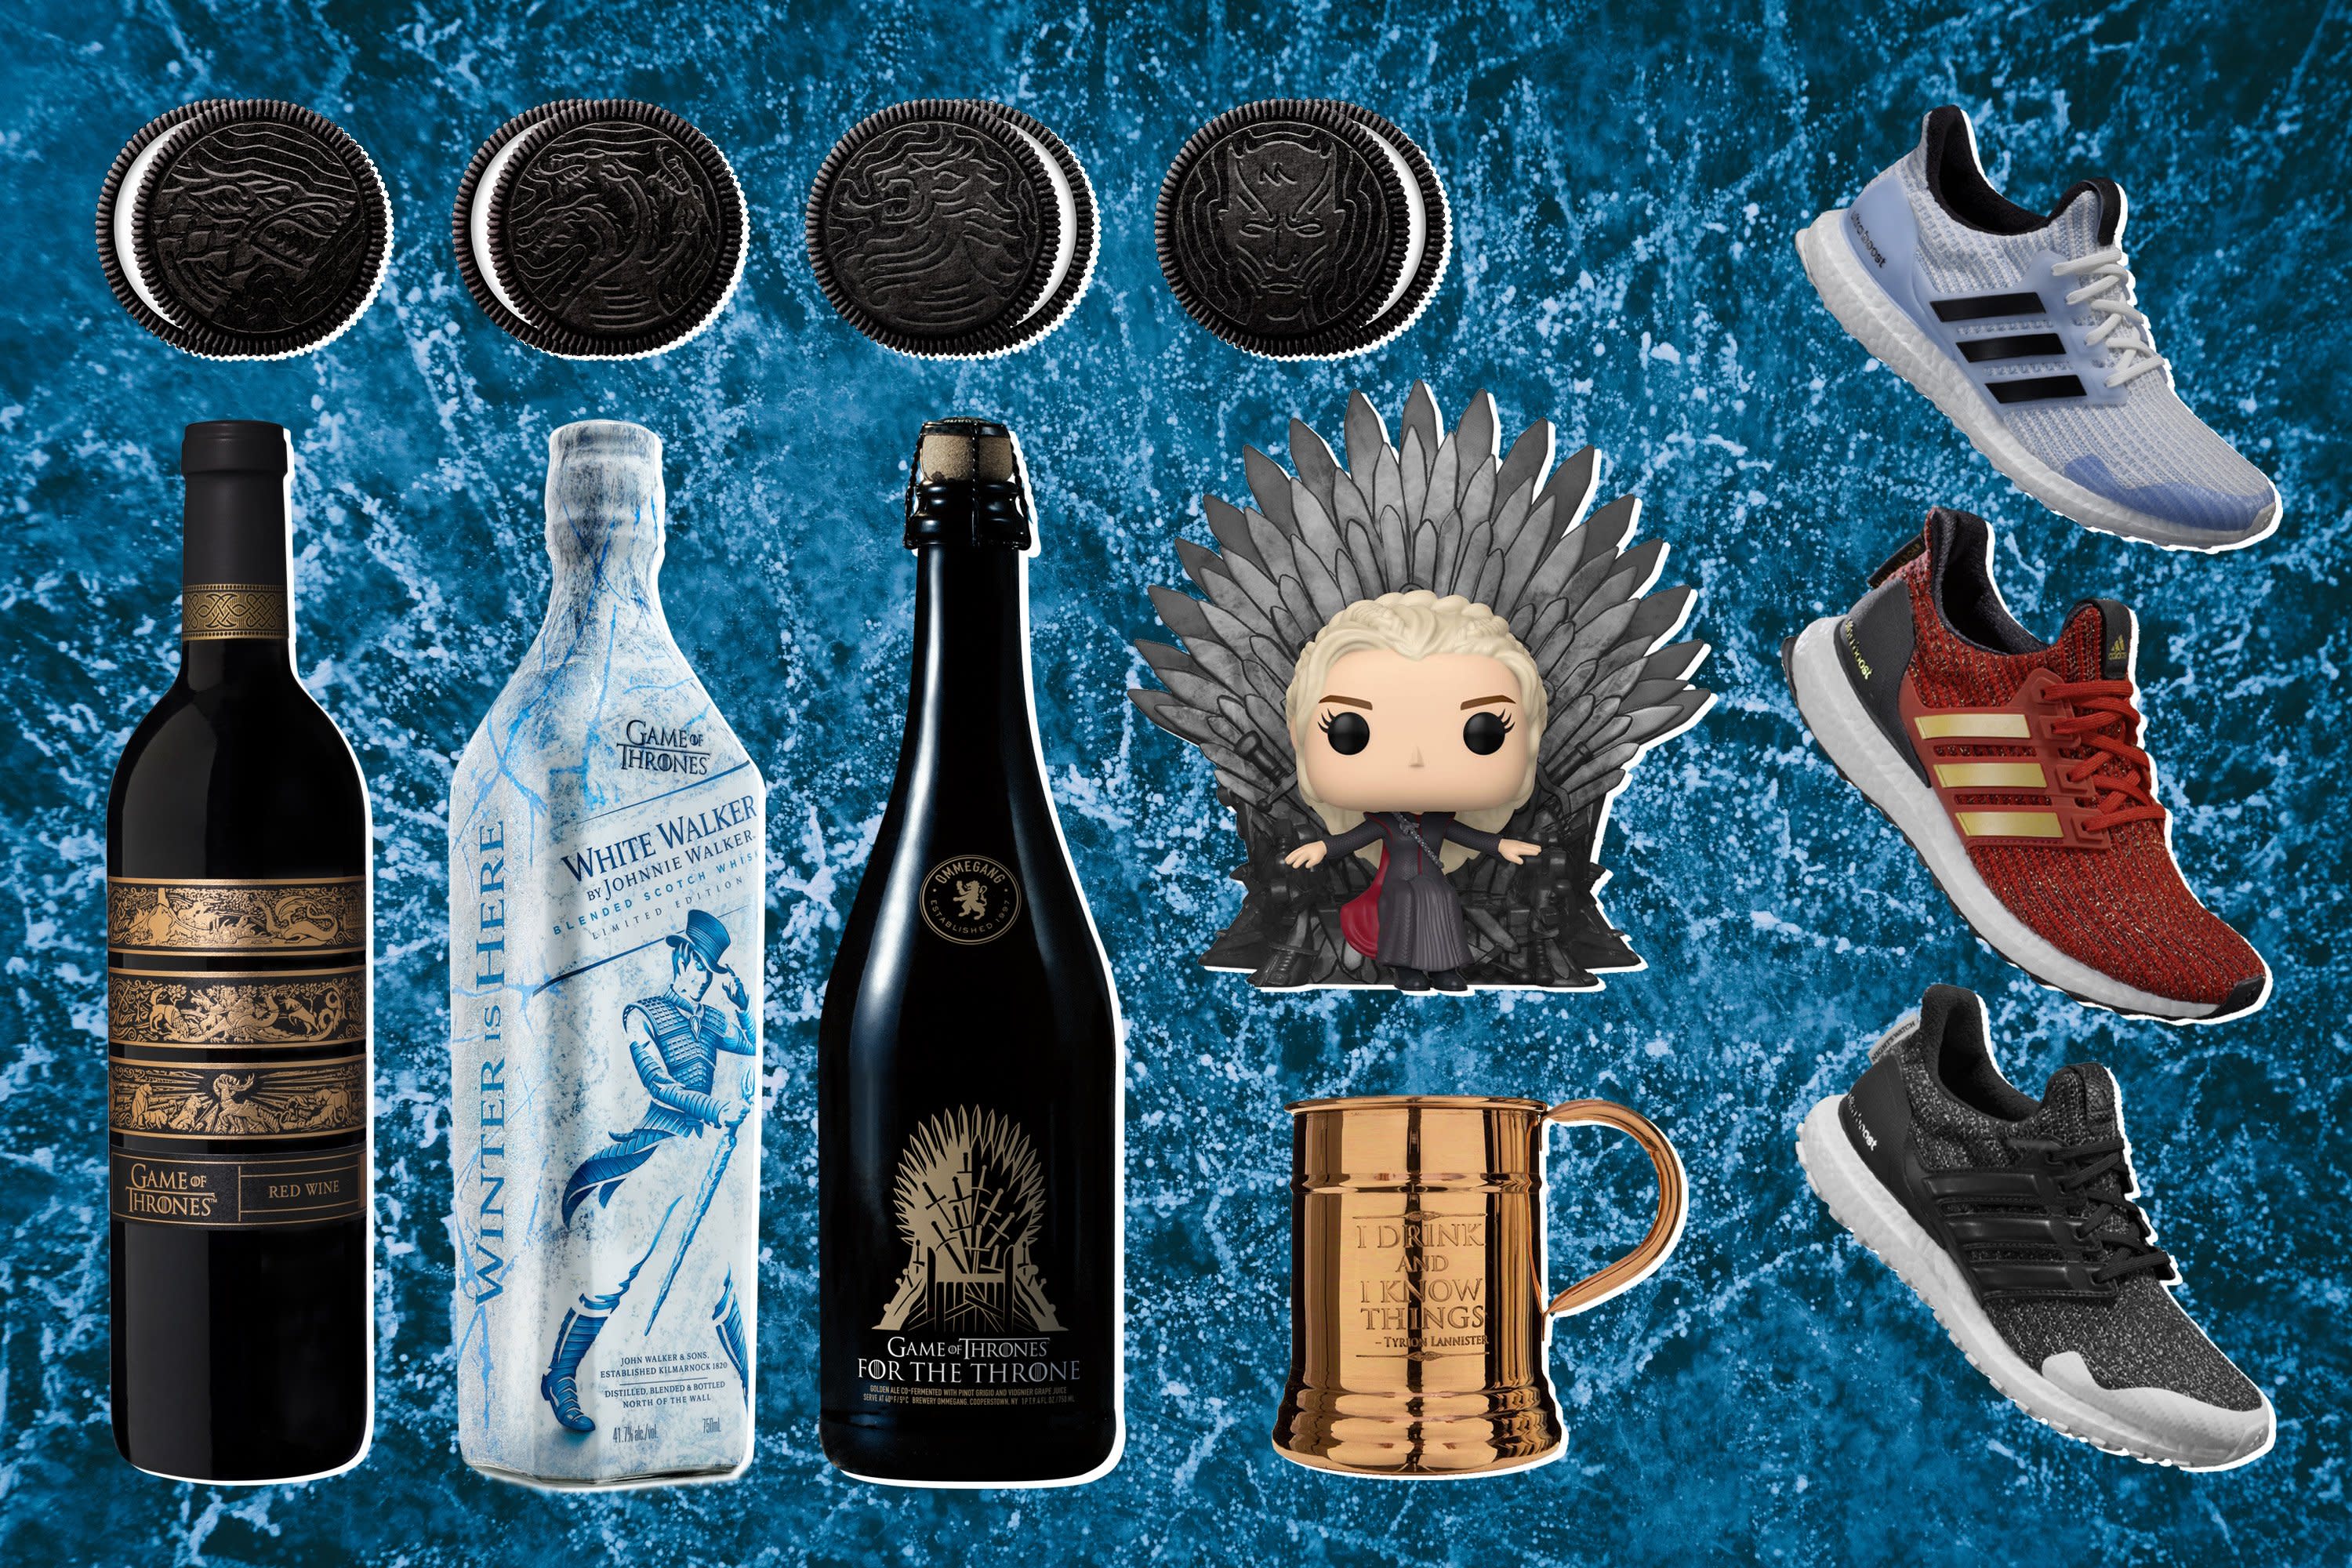 Where To Buy Game Of Thrones Oreos Clothing And Lannister